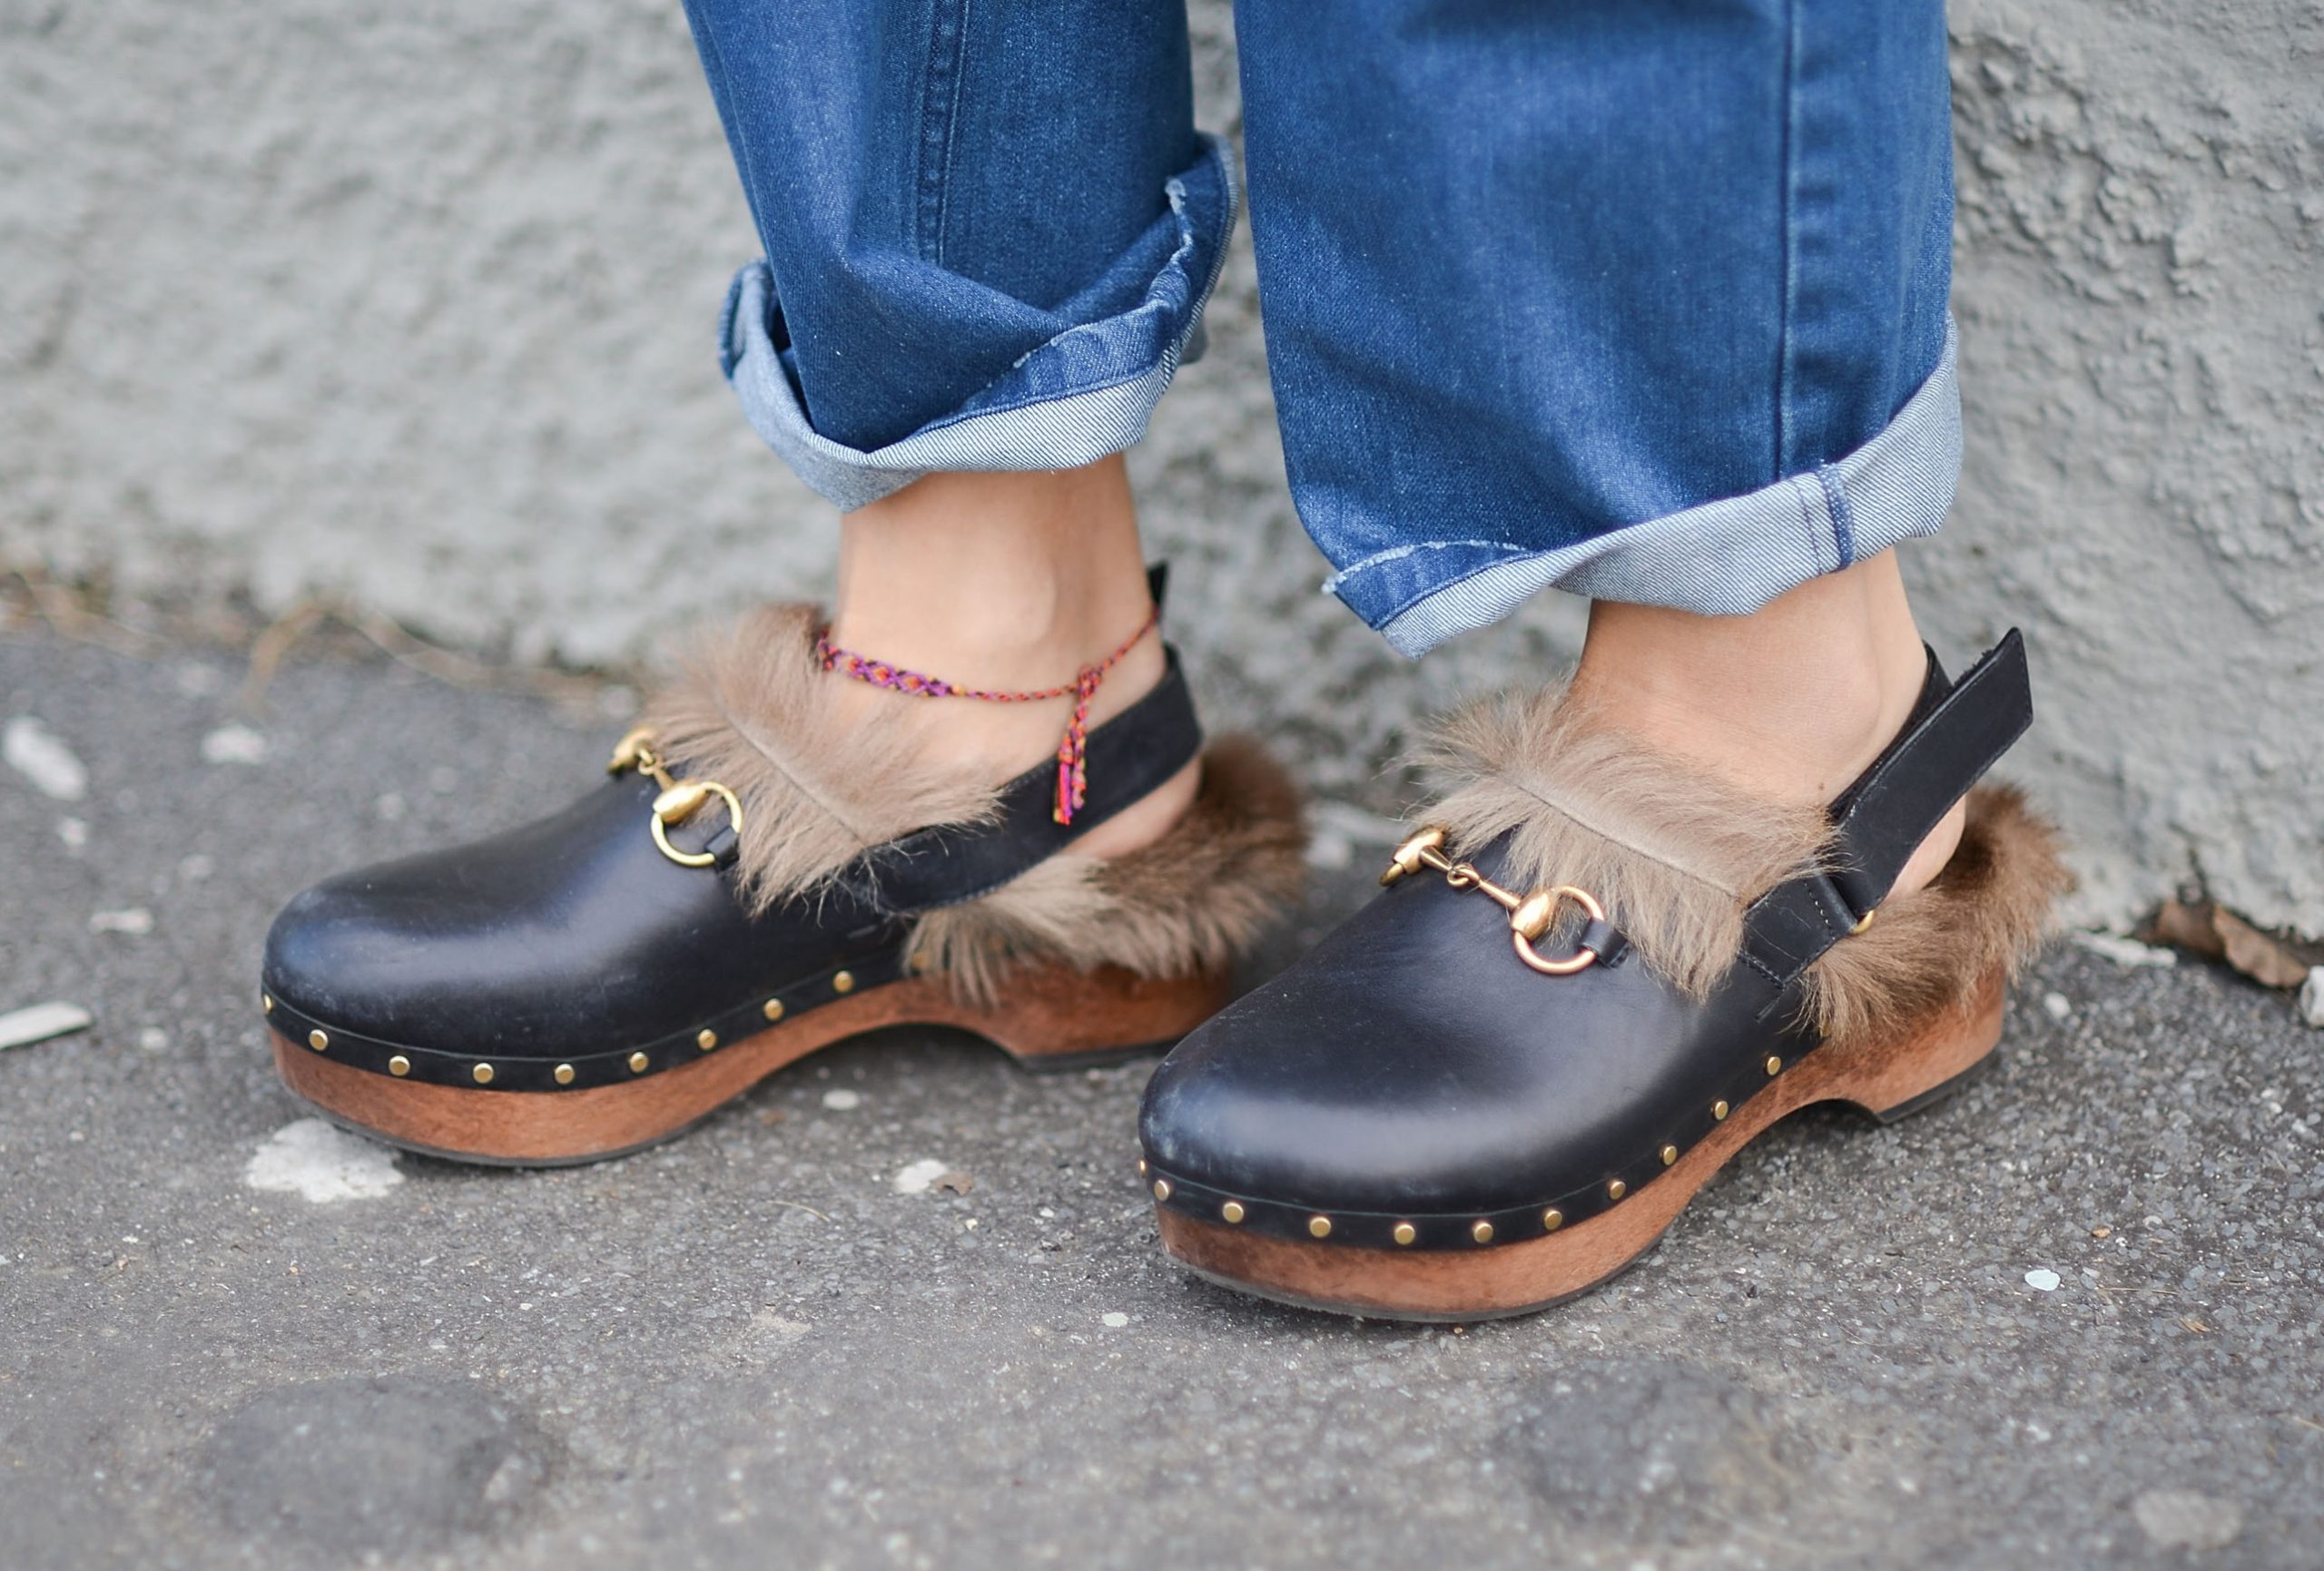 Clogs are a hit this spring. How to wear them without looking ridiculous or out of style?